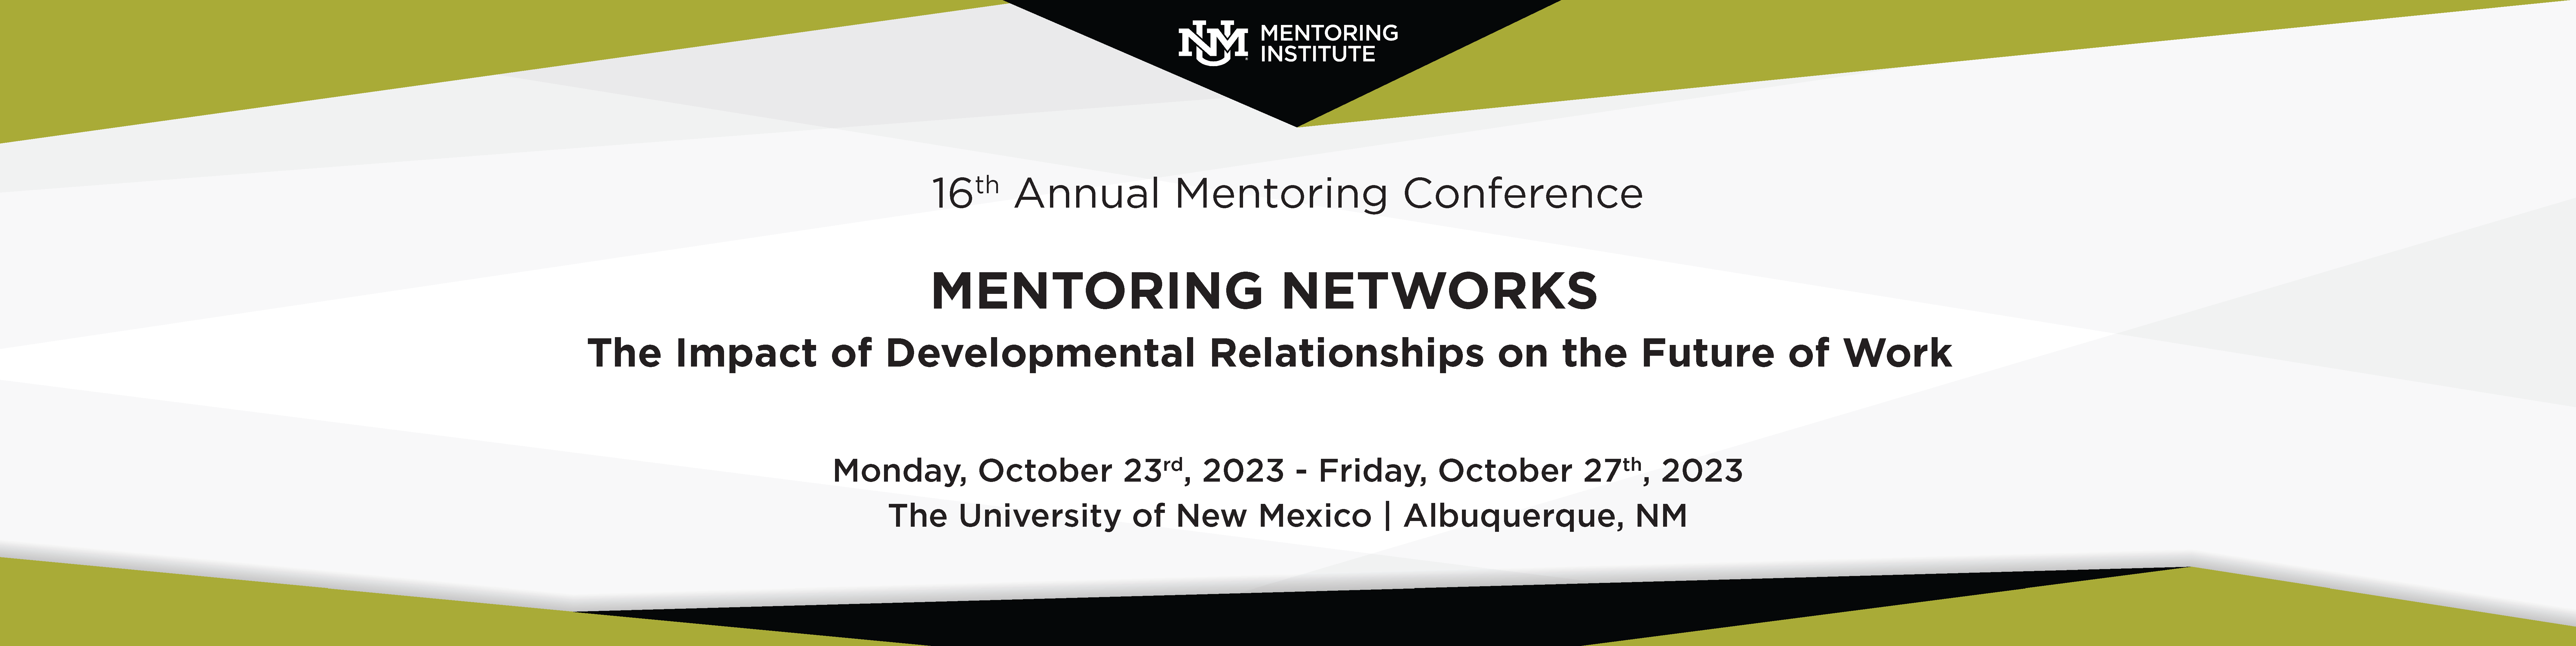 2023 Mentoring Conference